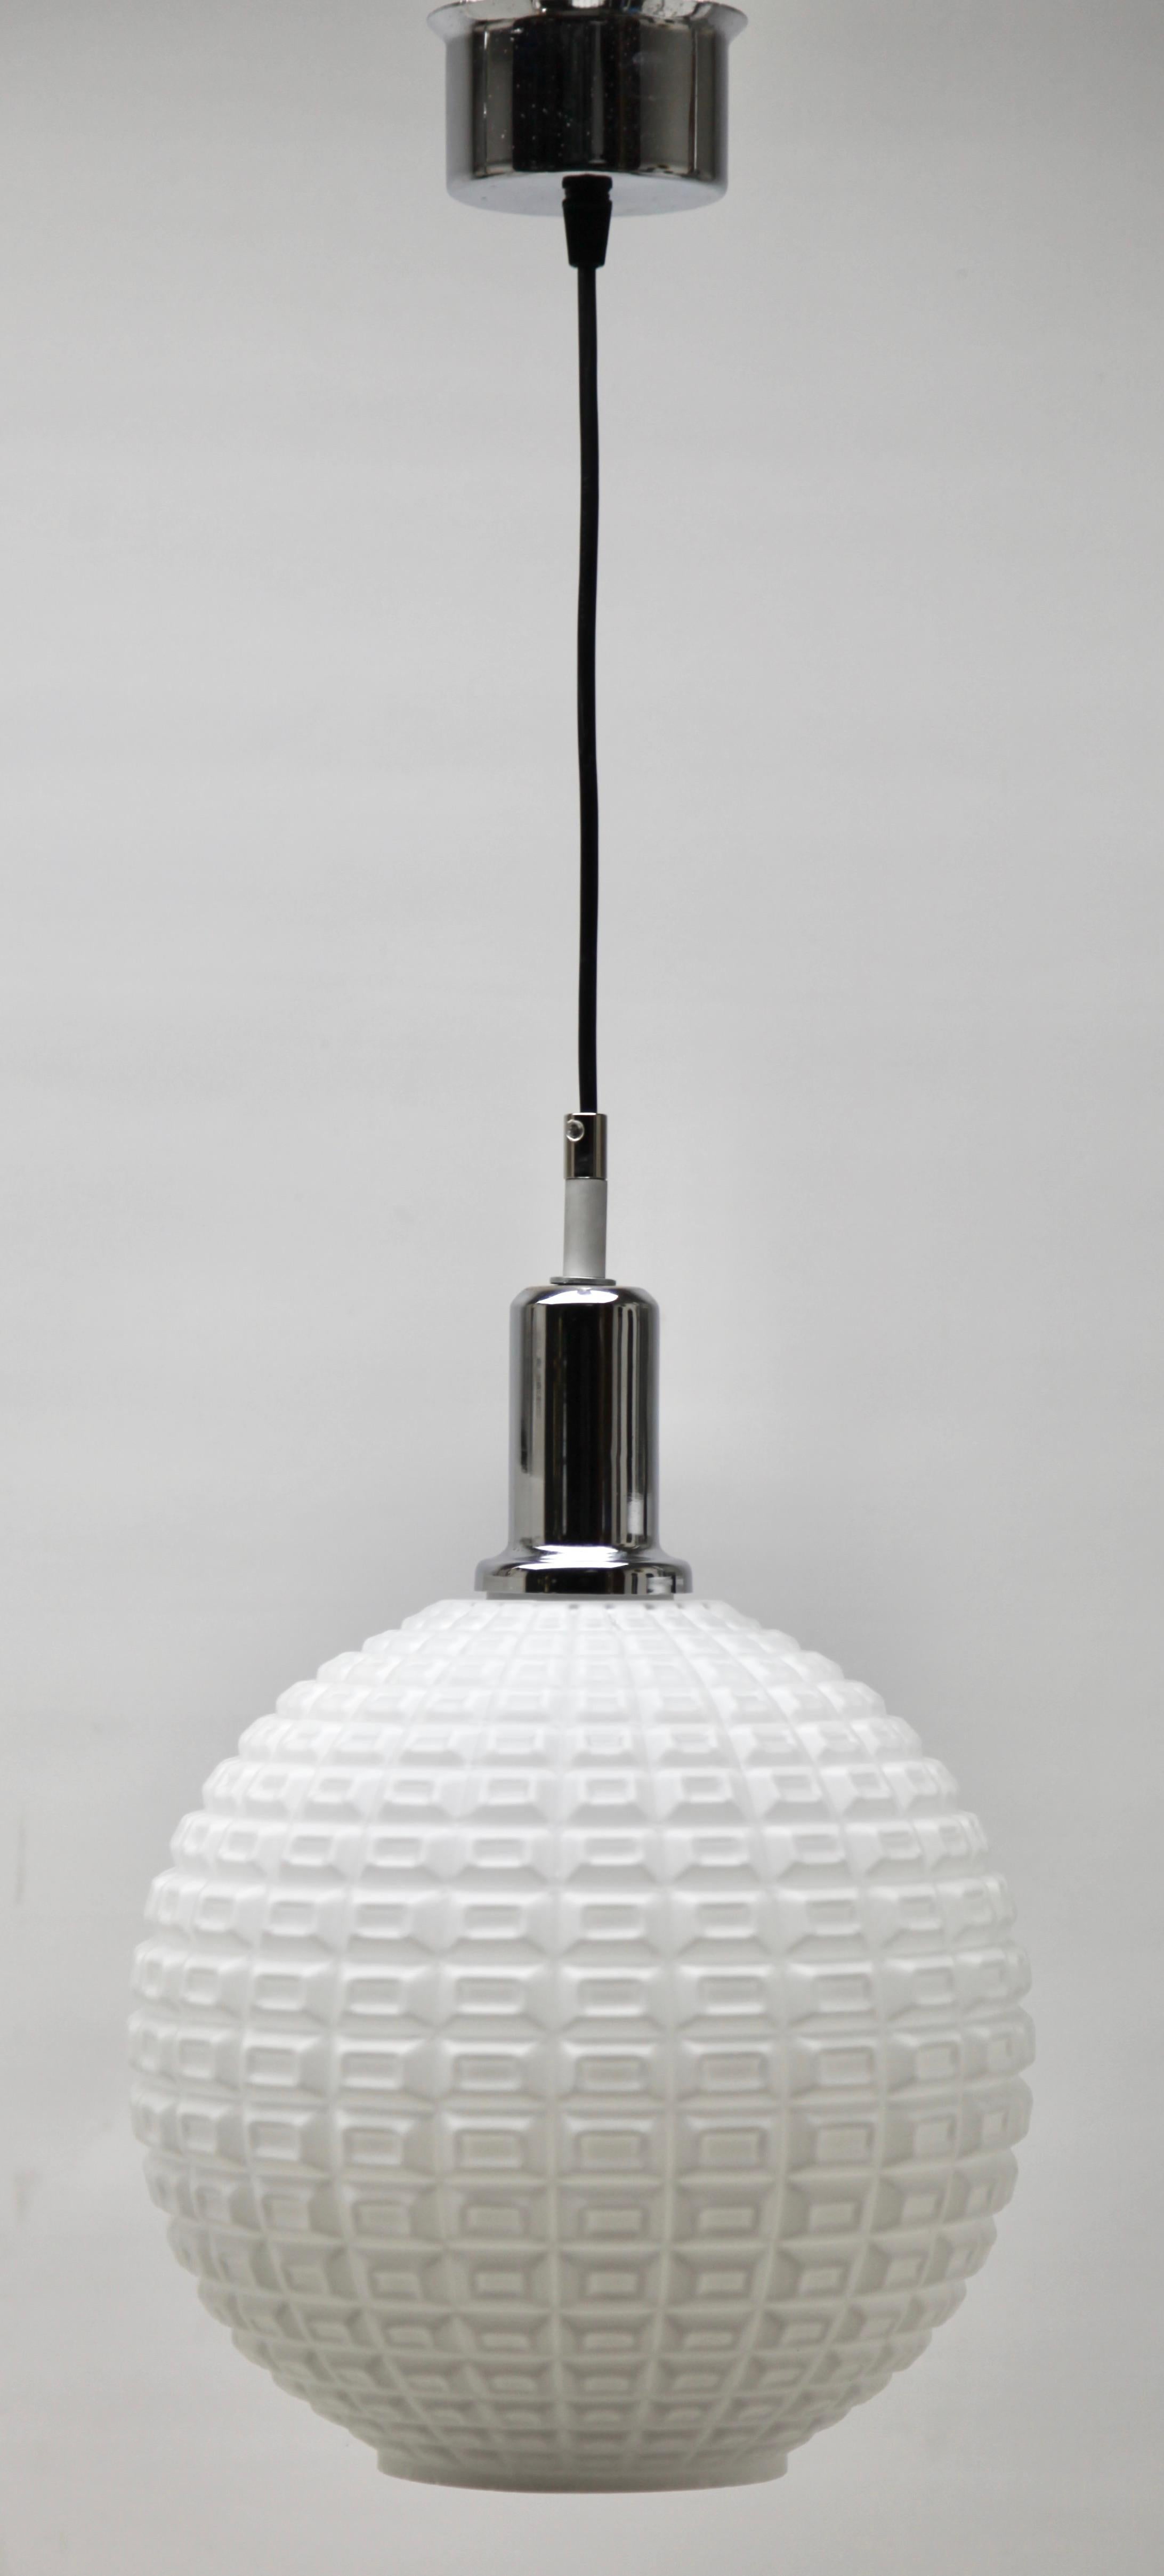 Midcentury Scandinavian Pendant Light, with Optical Opaline Shade For Sale 2